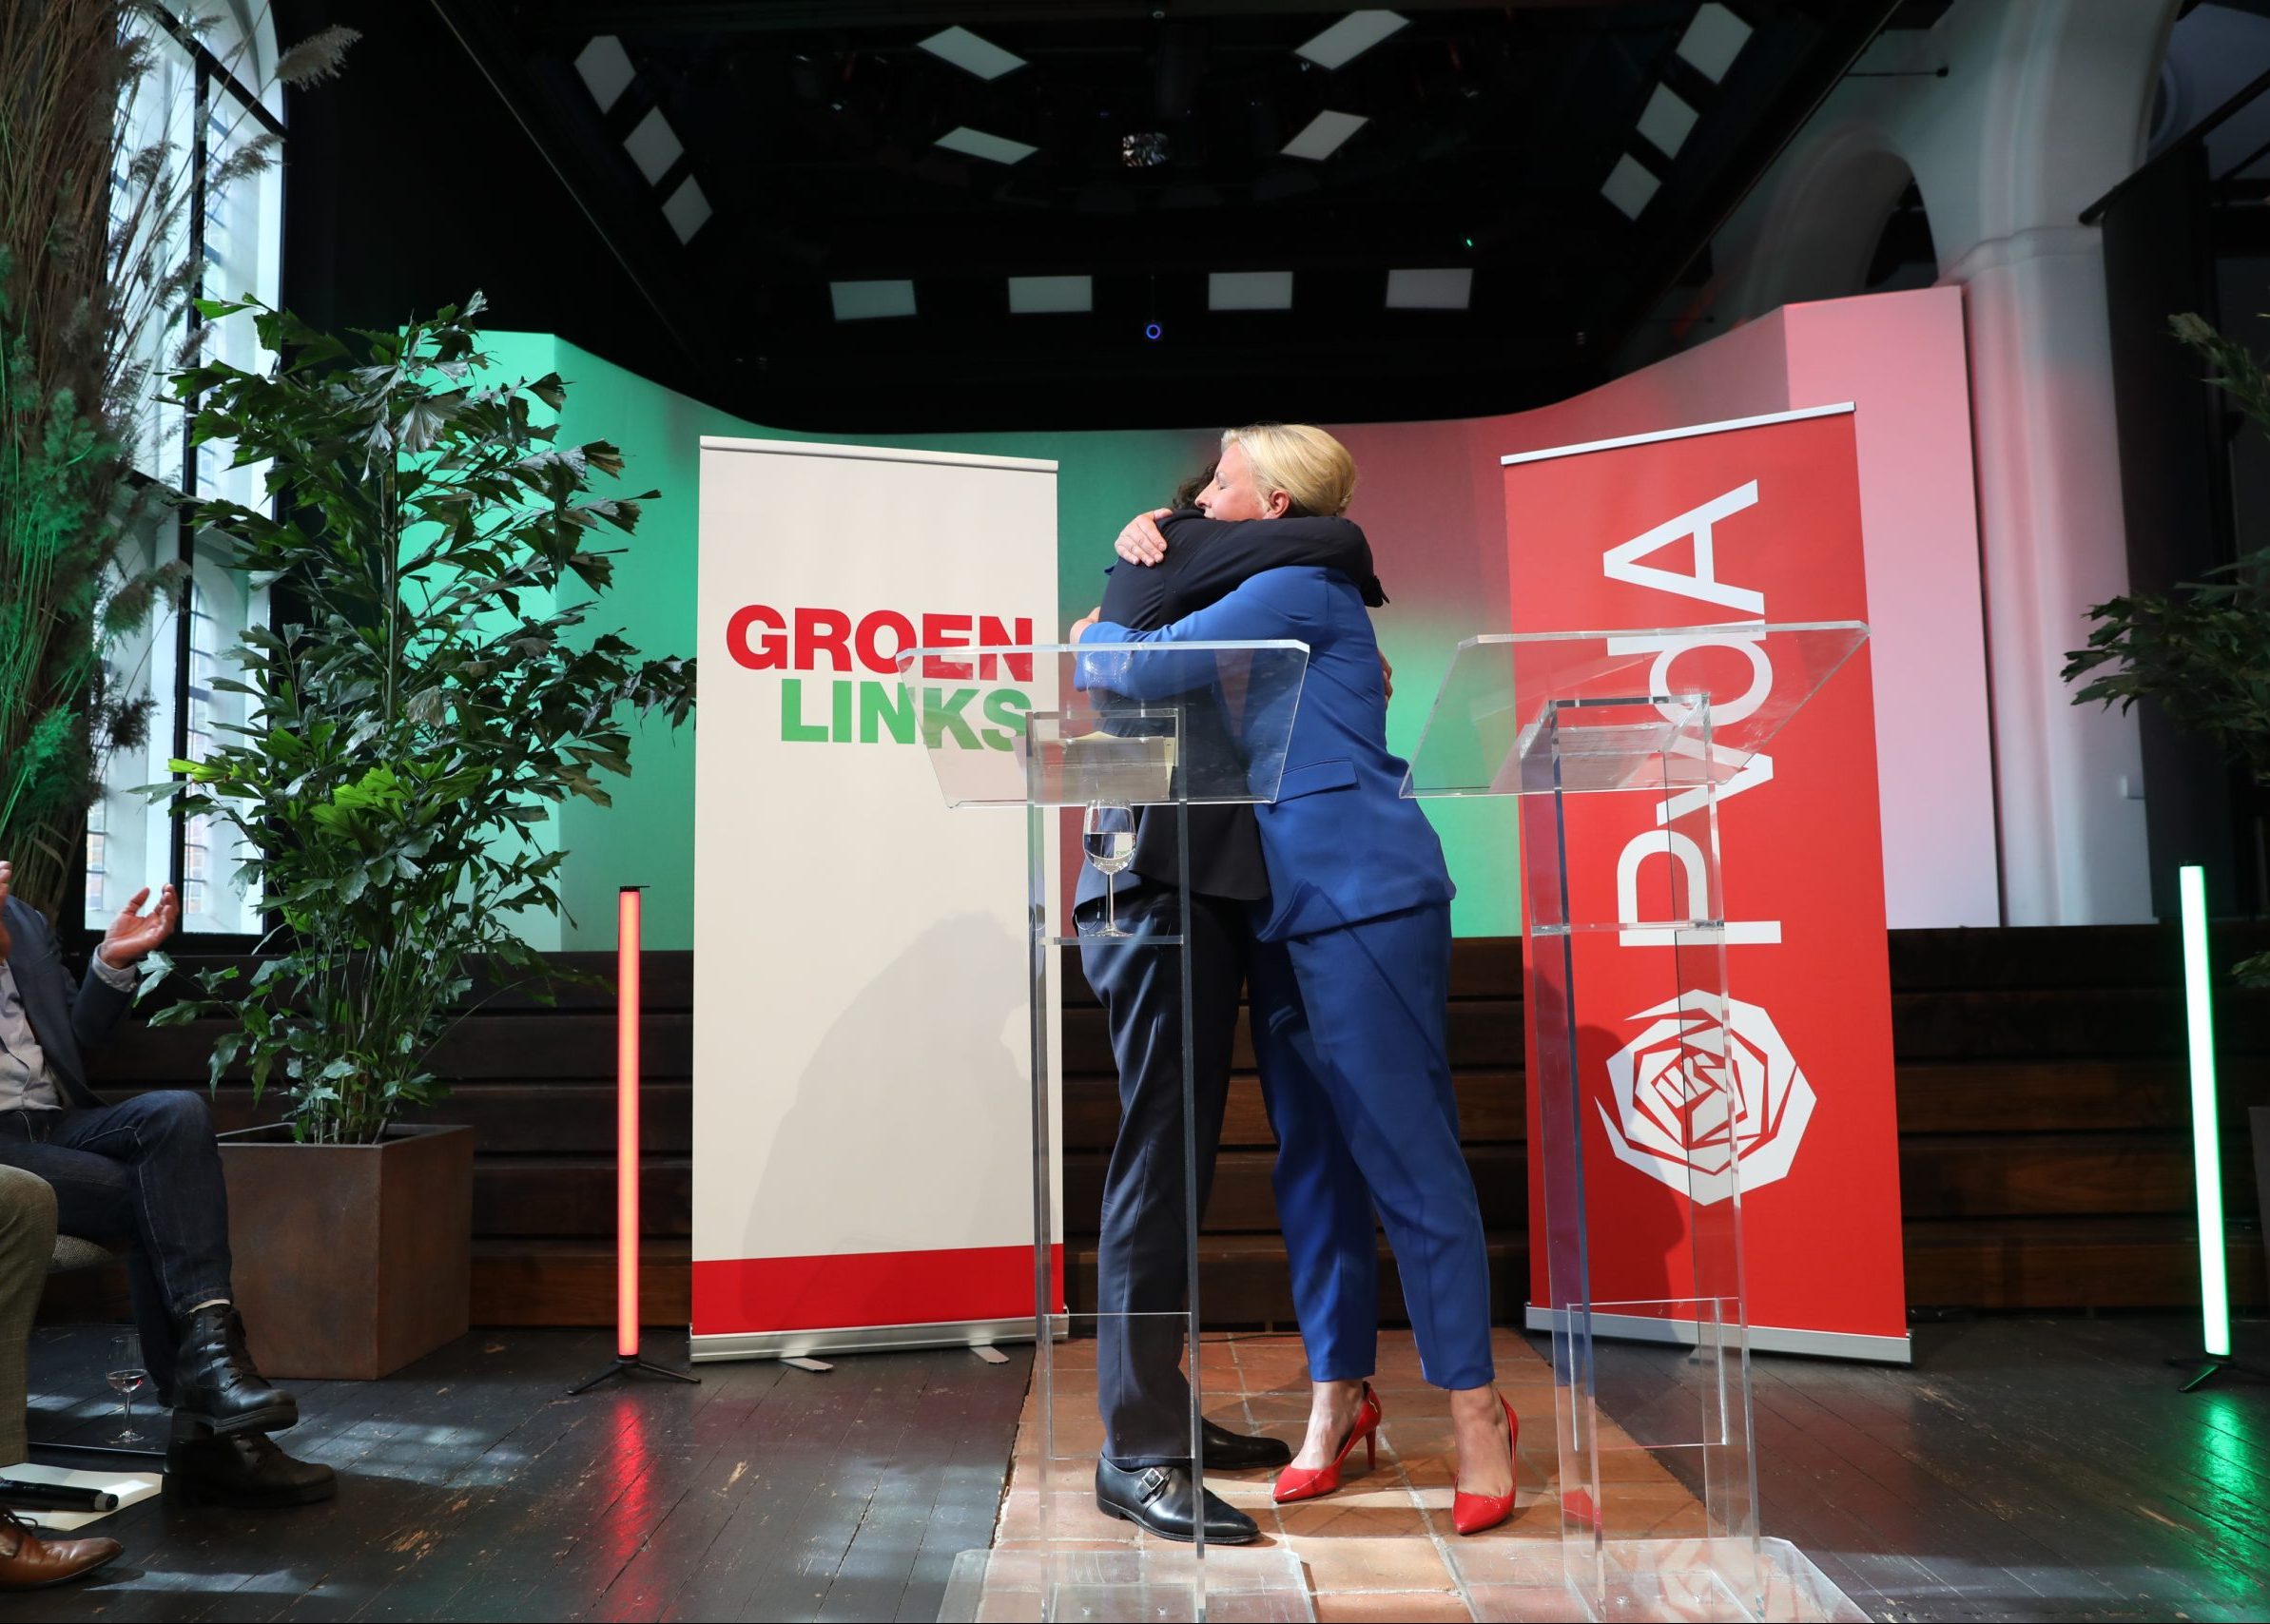 Upcoming national elections in the Netherlands: the case for Social Democrats and Greens joining forces